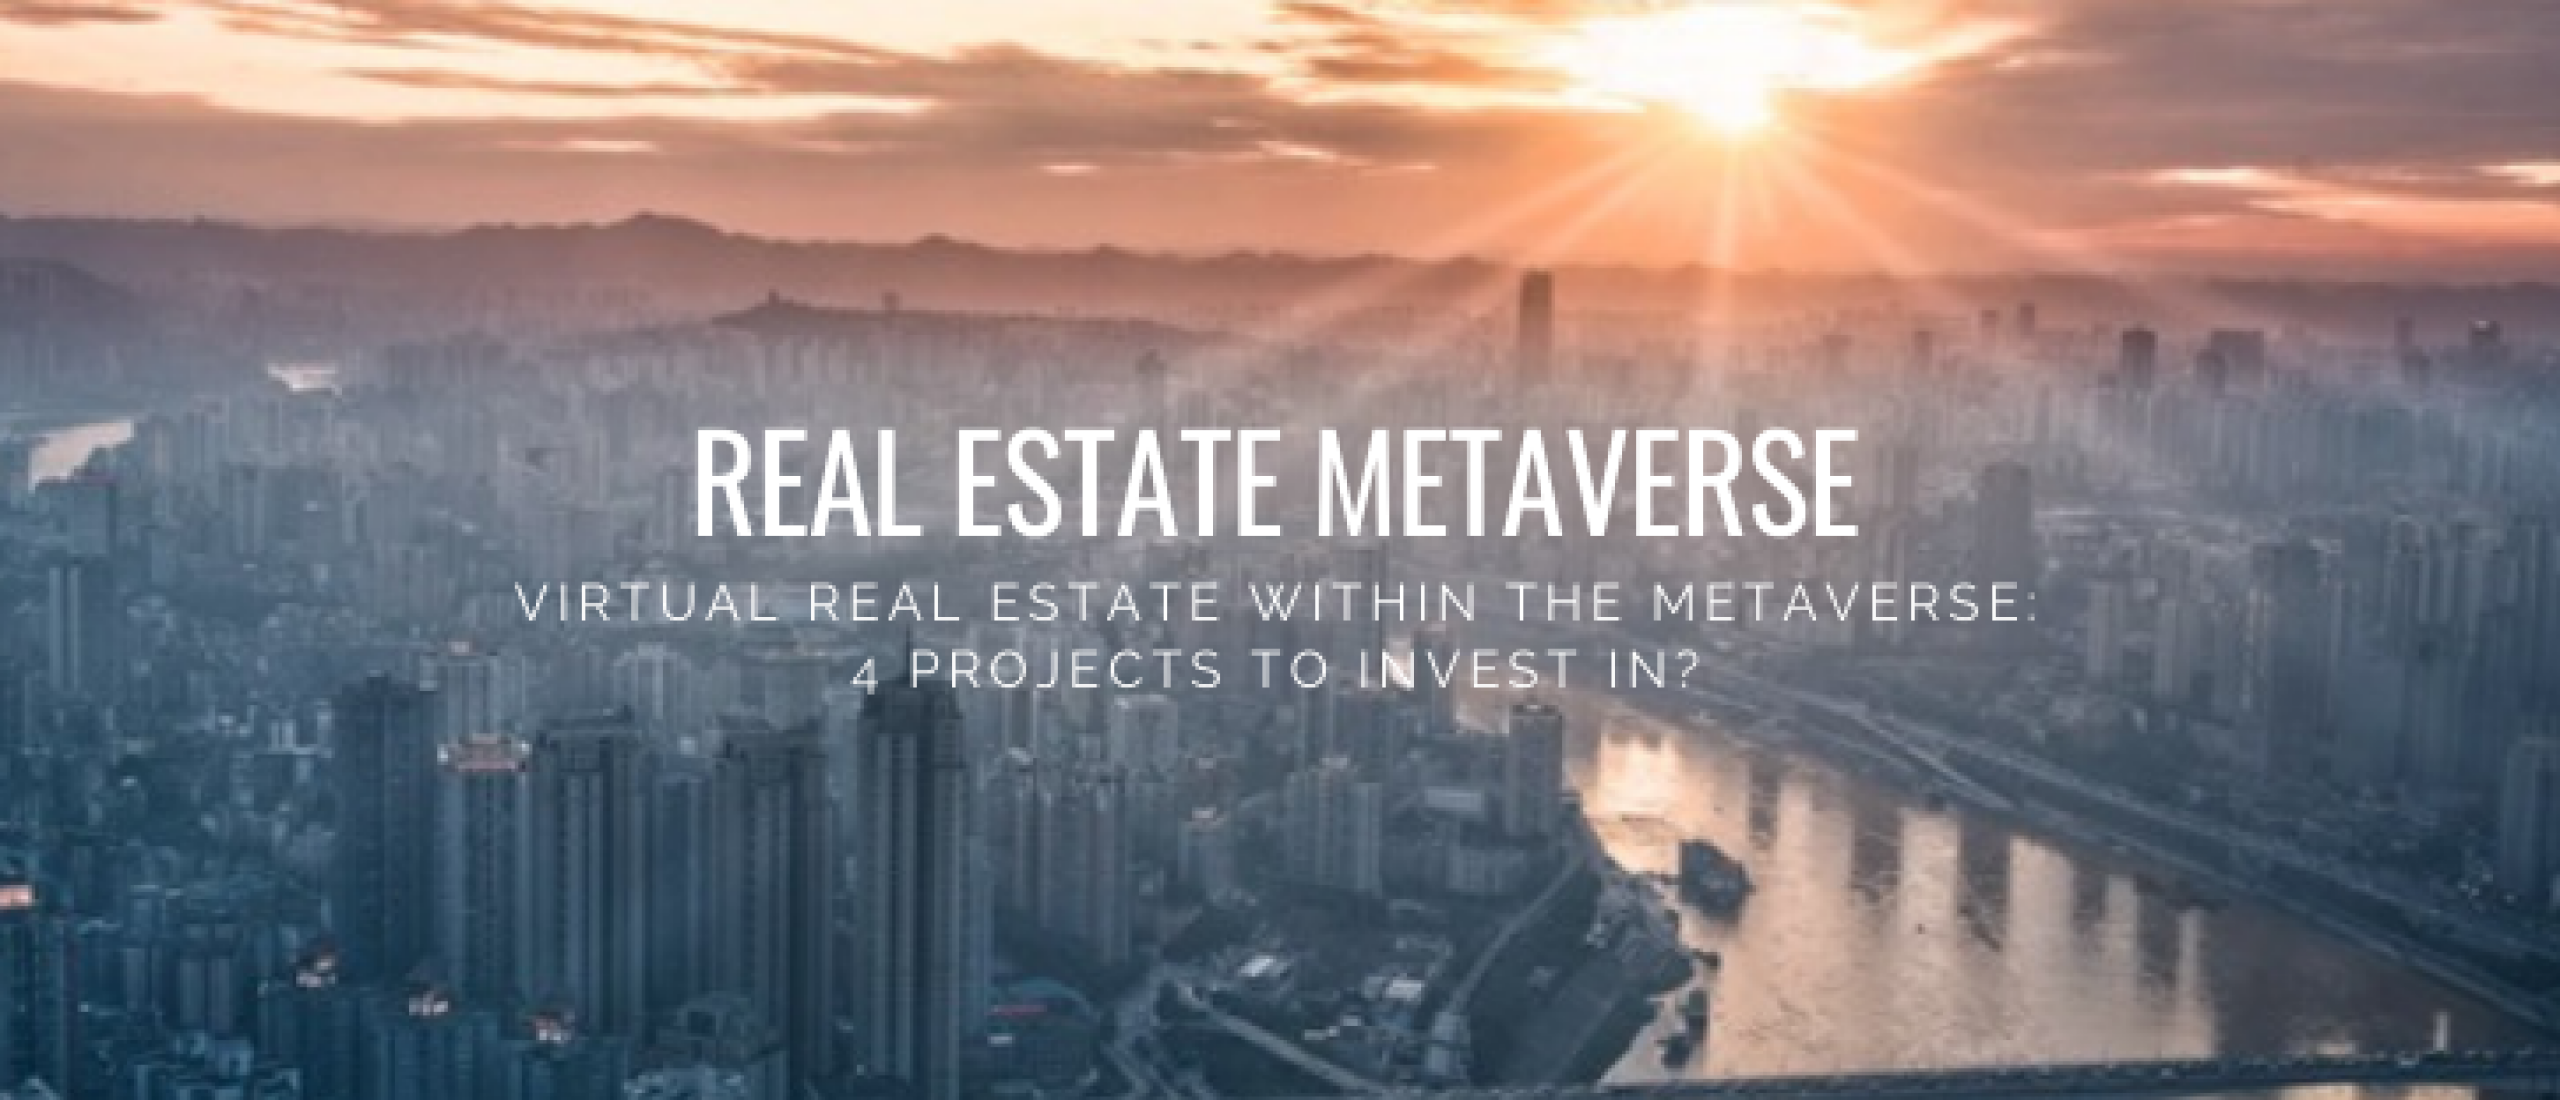 Real Estate Metaverse: Projects, News & Developments